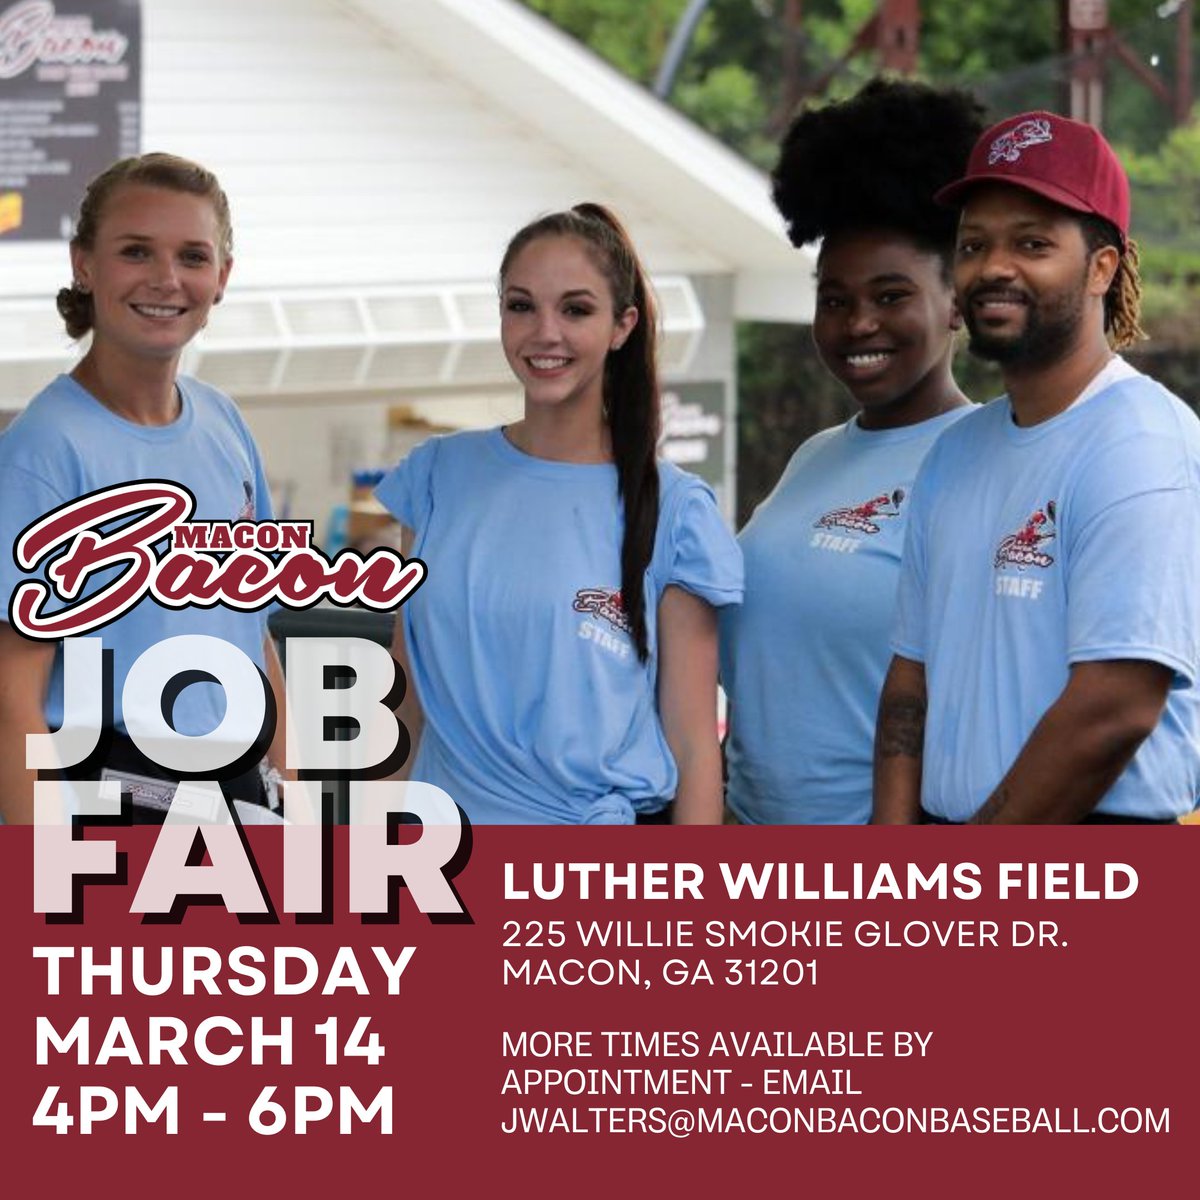 Time for another Macon Bacon job fair! Join us at Luther Williams Field on Thursday, March 14th at any time from 4pm to 6pm to interview for a spot on our team on gamedays. There's nothing like working at a ballpark. Come by for a chance to work at the ballpark all summer long!